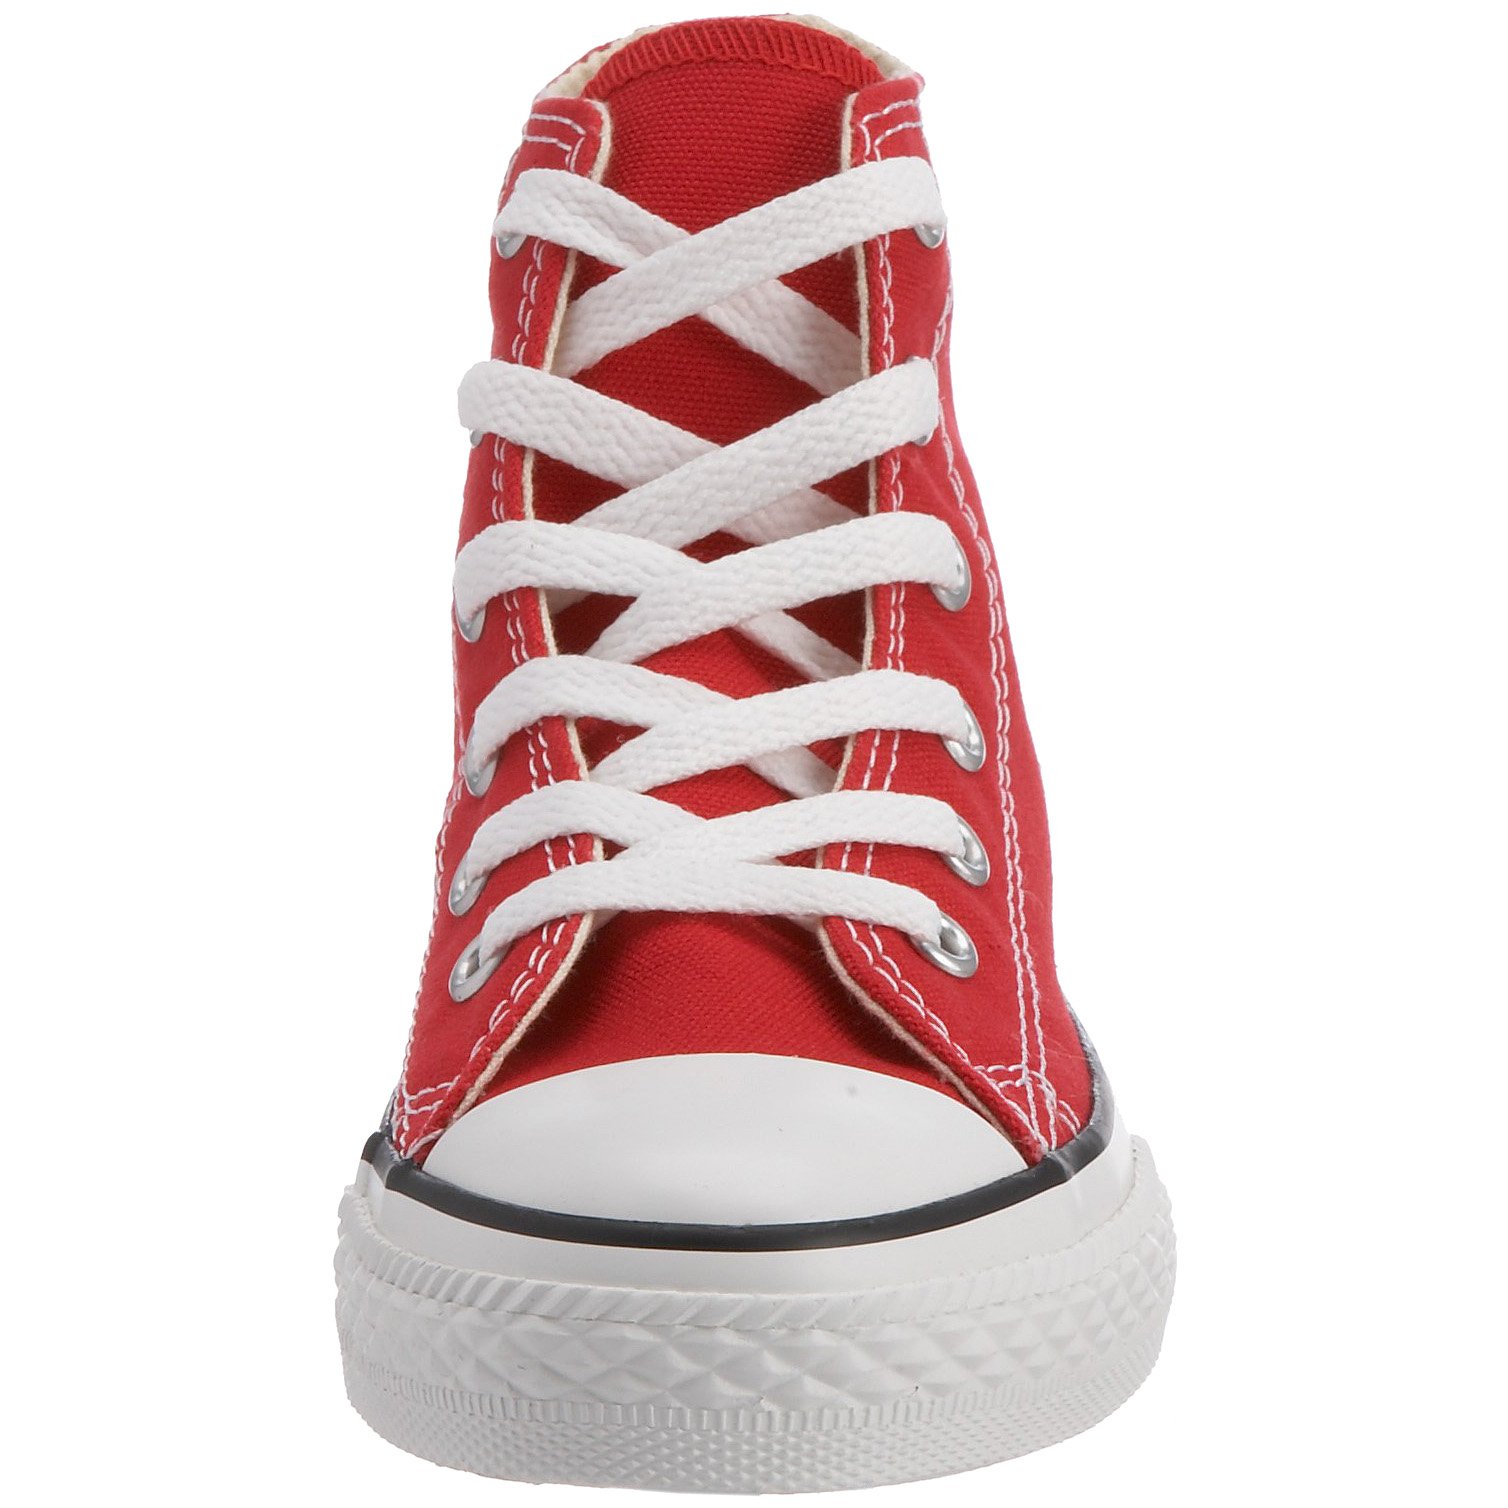 Children's Converse Chuck Taylor All Star High Top Sneaker - image 2 of 11